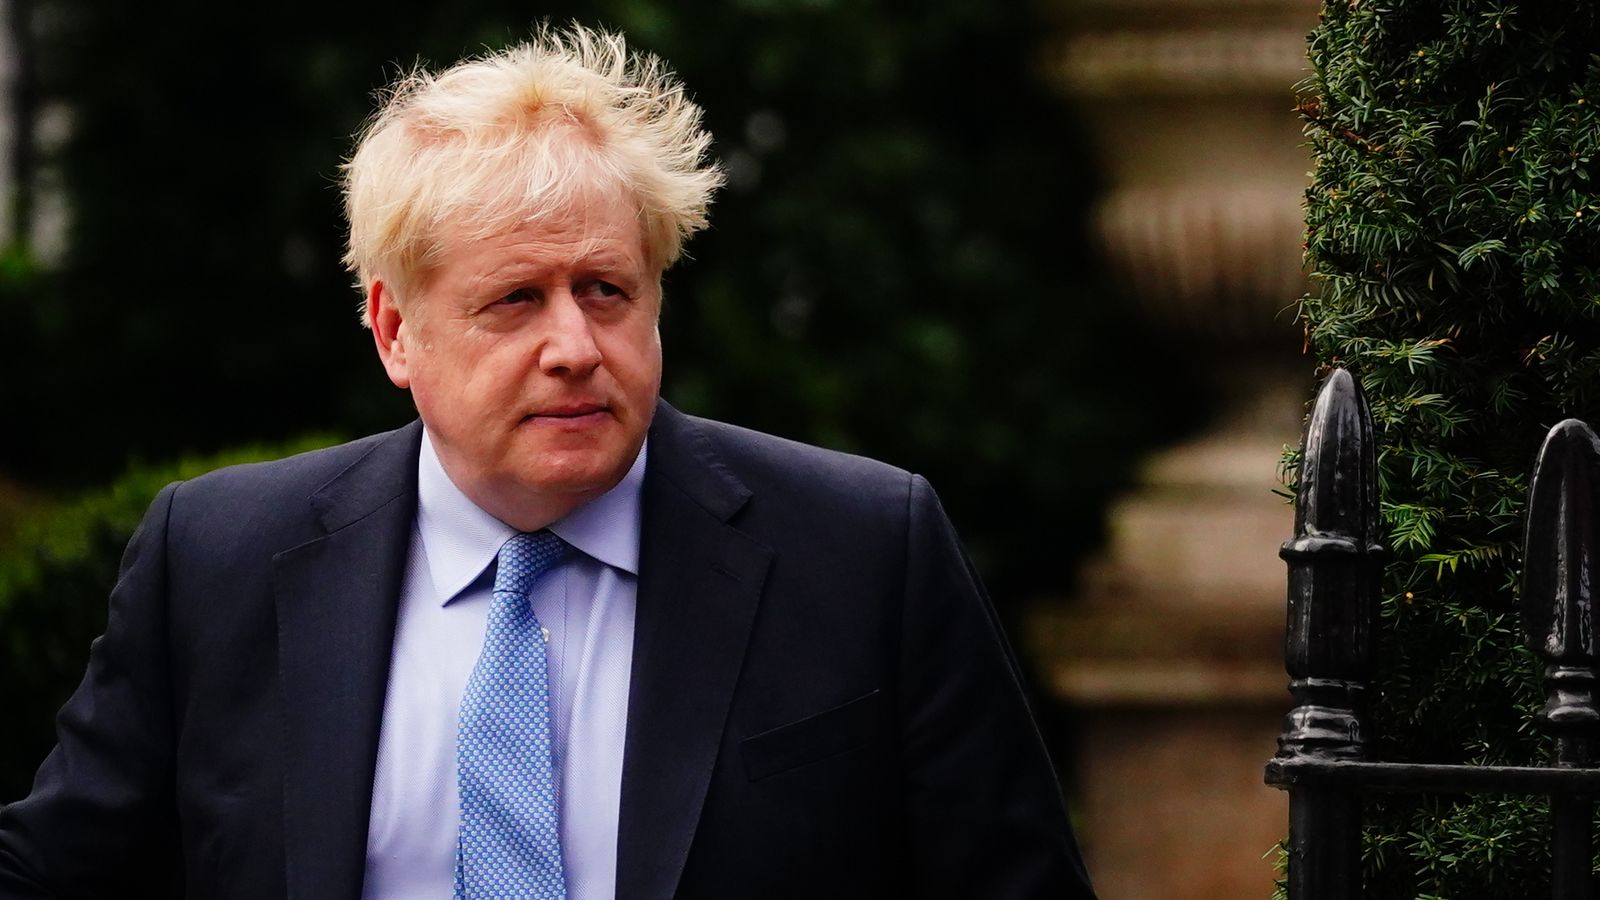 Johnson accused of using 'distraction tactic' as MPs prepare to publish partygate report